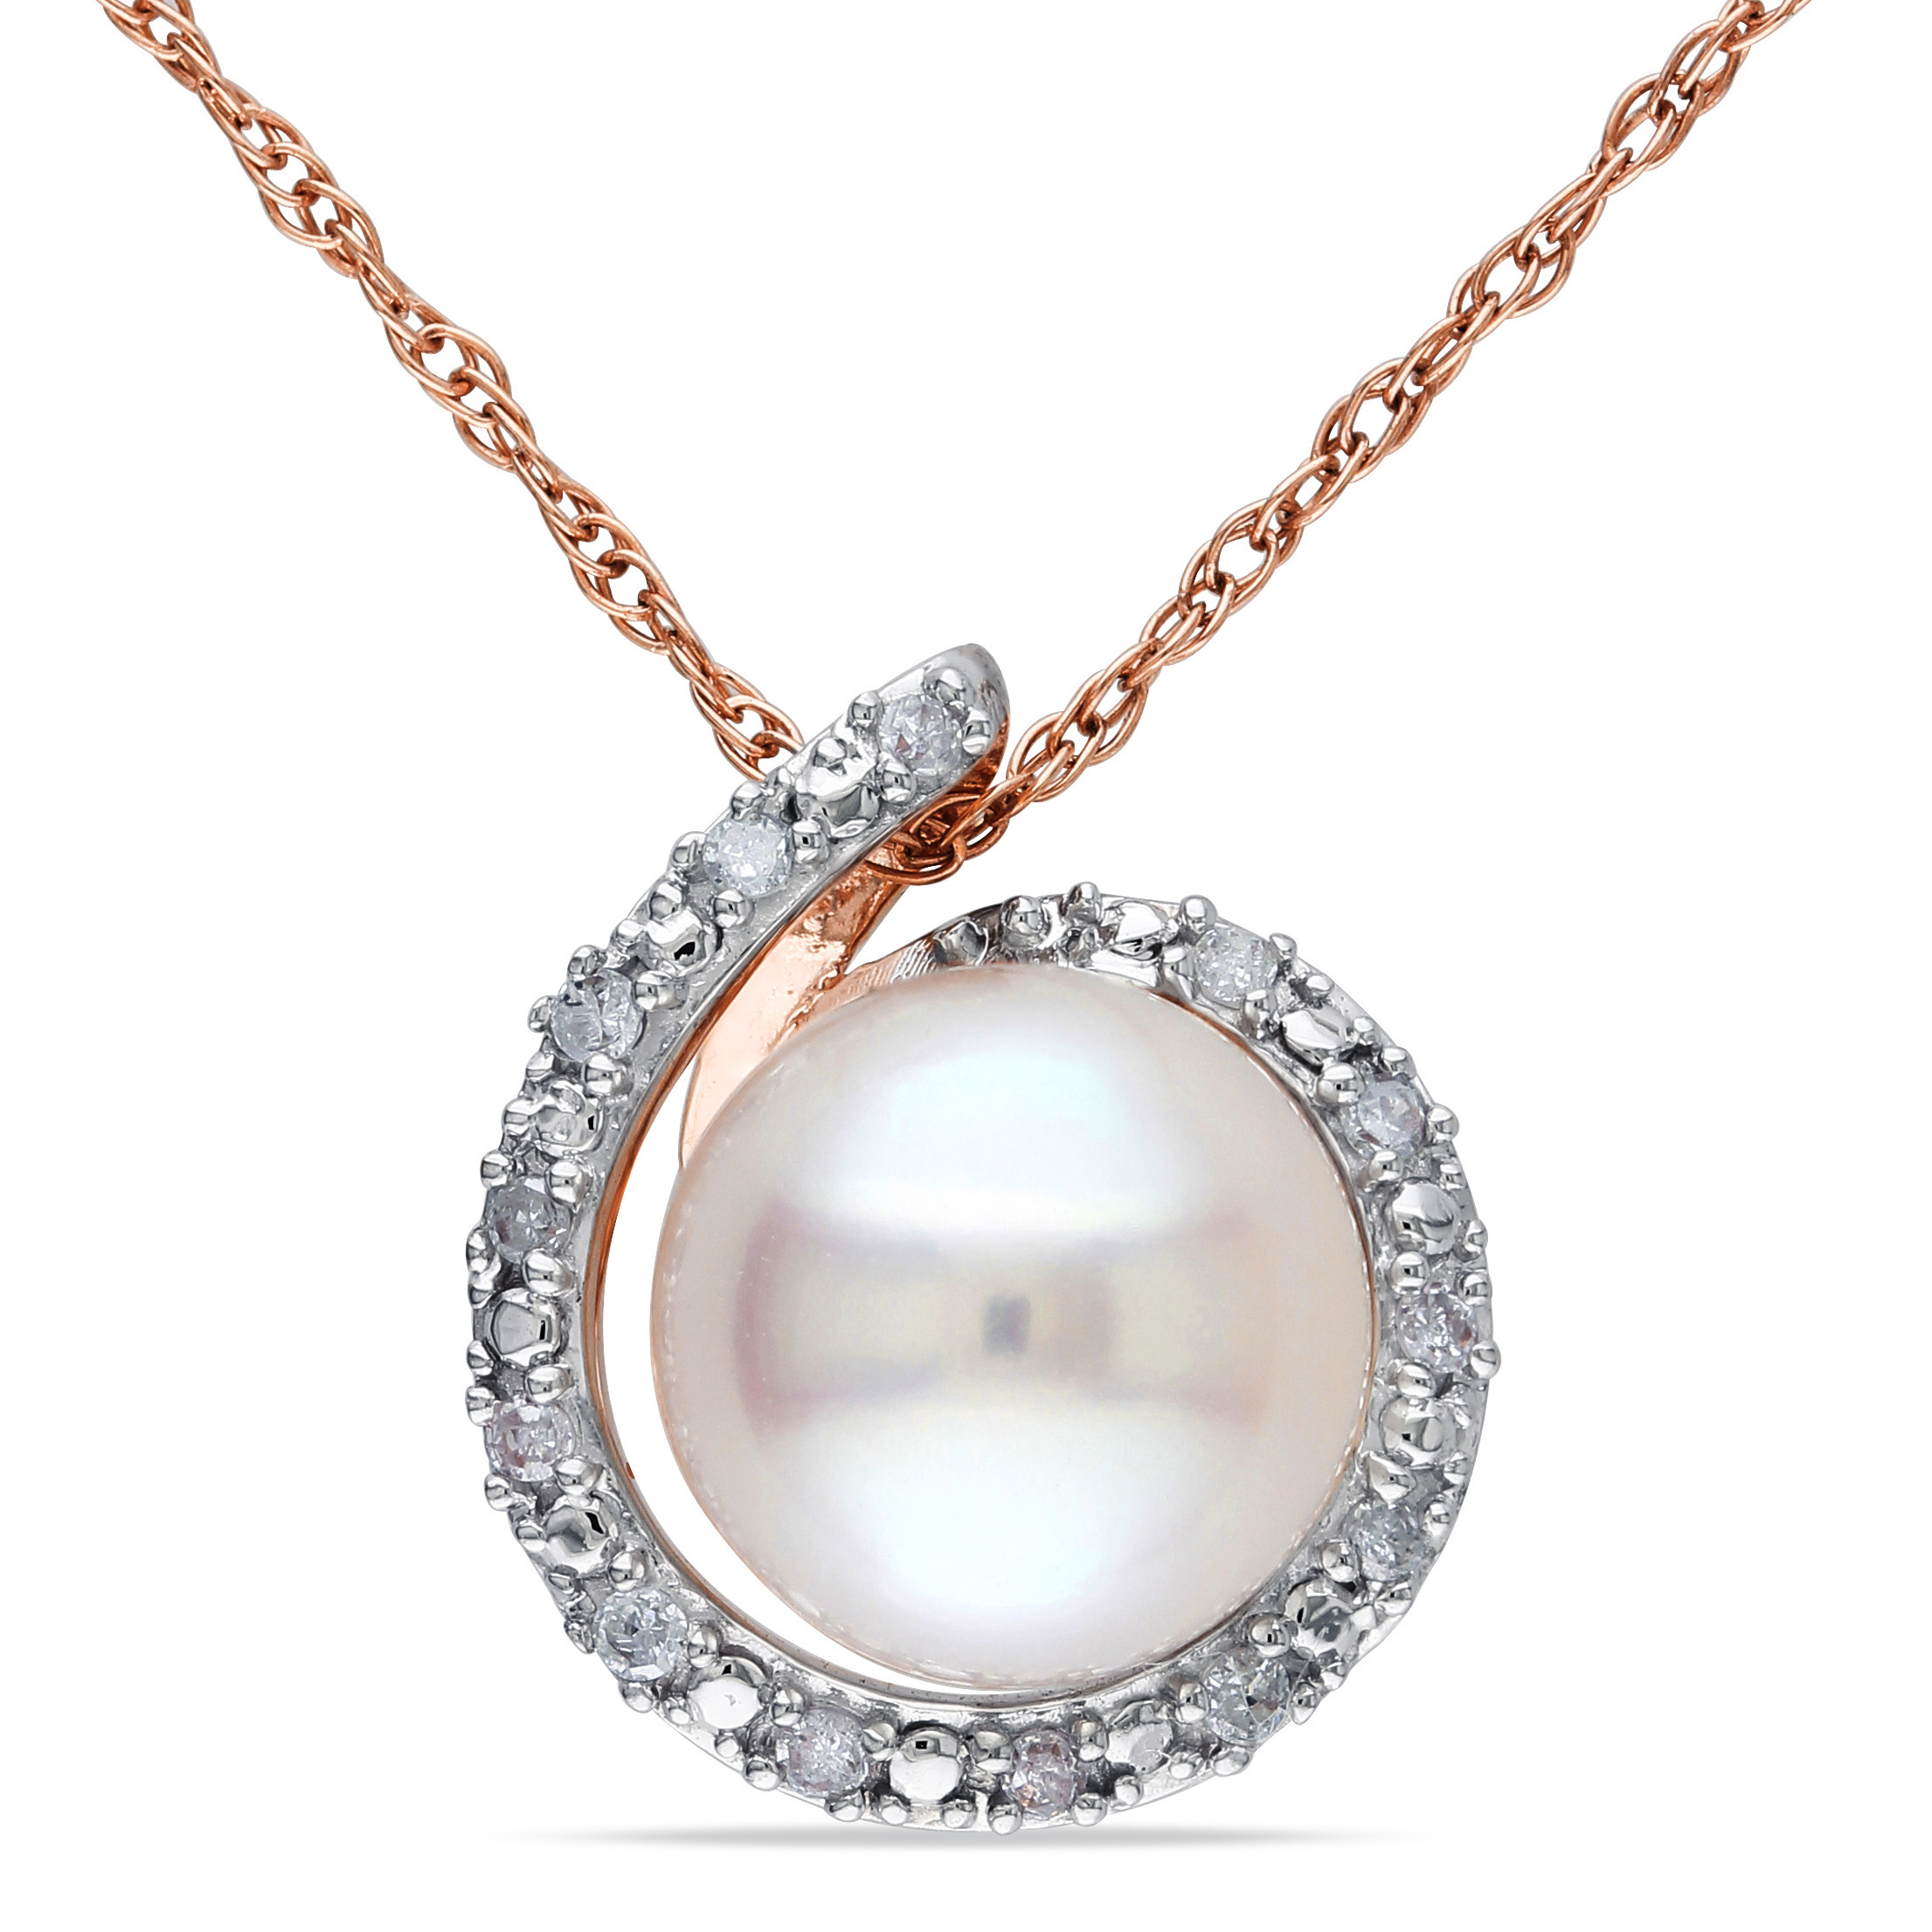 8 - 8.5 MM Cultured Freshwater Pearl and Diamond Swirl Halo Necklace in 10k Rose Gold